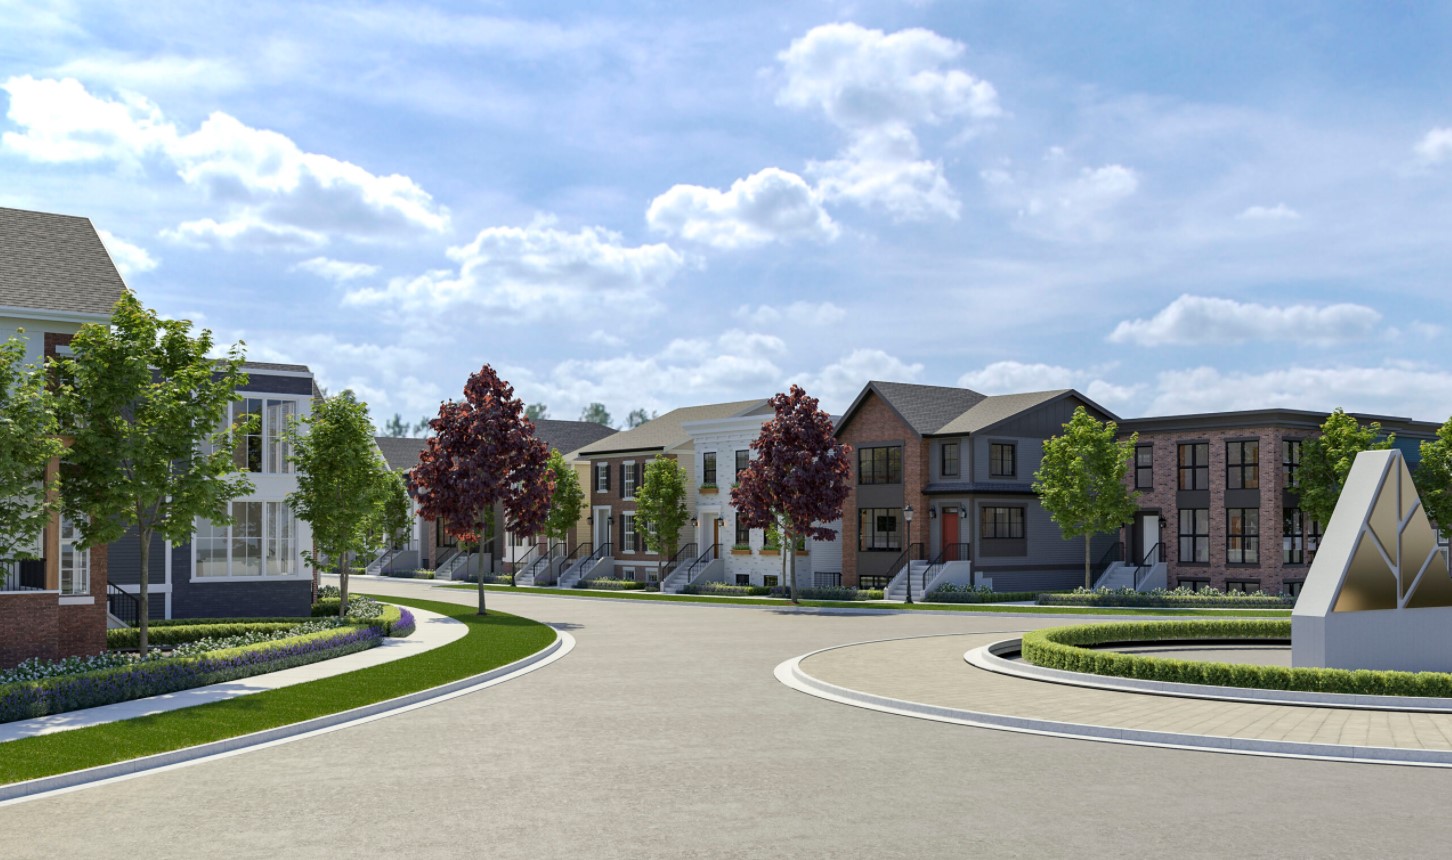 A master-planned community located between Chilliwack Mountain and downtown Chilliwack.